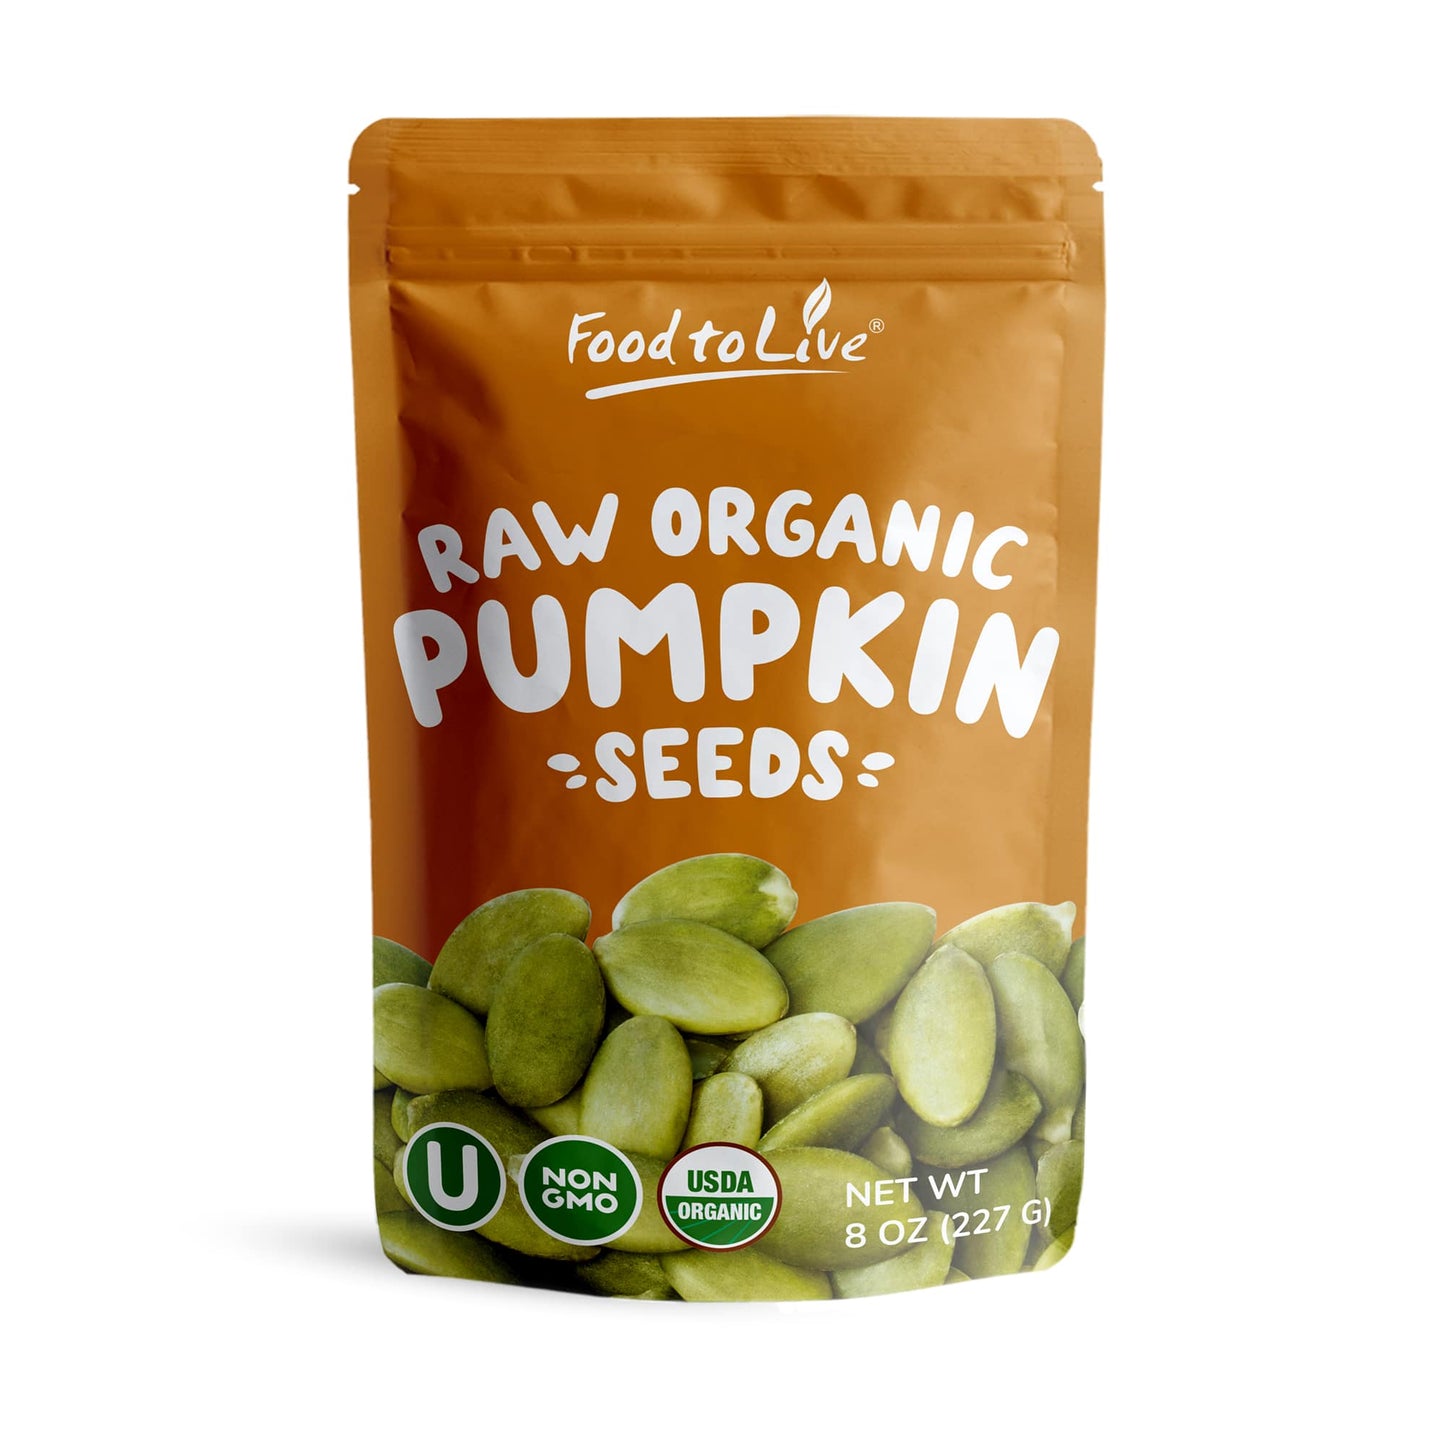 Organic Sprouted Pumpkin Seeds with Himalayan Salt – Non-GMO, Lightly Salted, Raw, Keto and Paleo Friendly, Vegan, Bulk. Highly Nutritious Superfood. Great for Snacking, Salads, and Soups